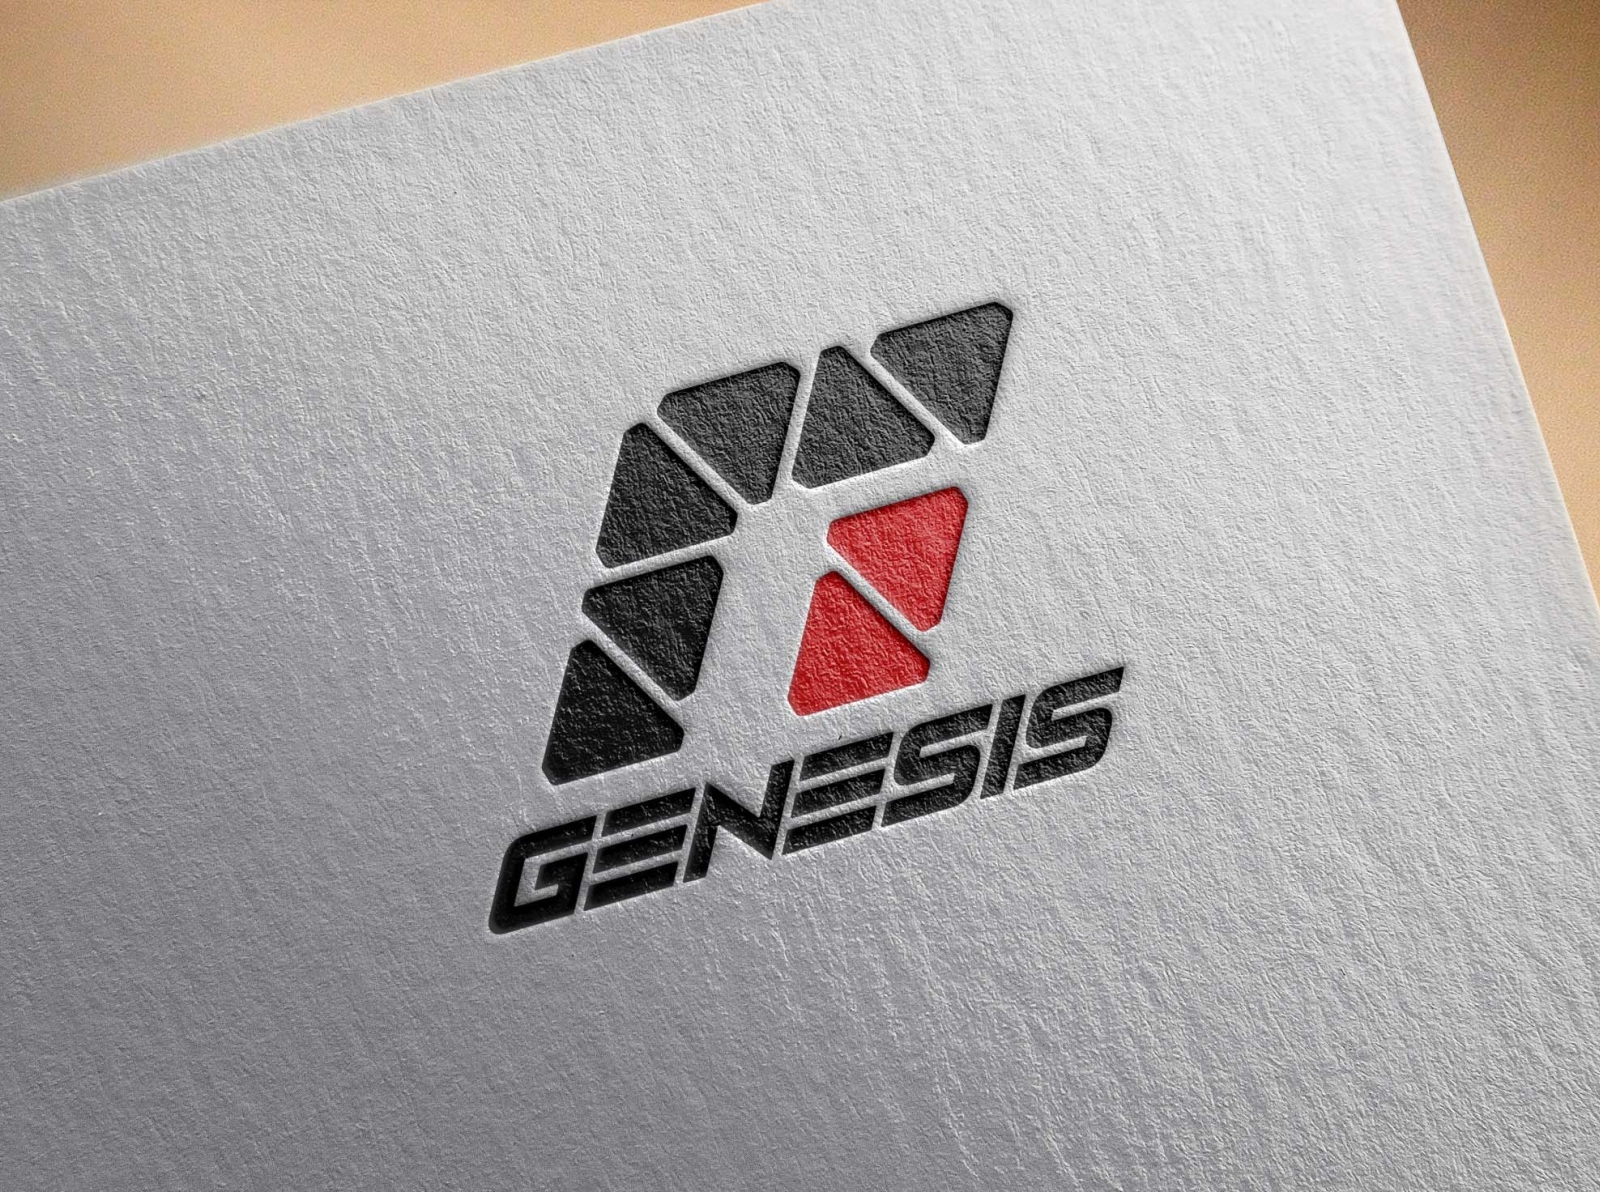 Genesis Logo with Equus Style, What Does Hyundai Envision for the Vision G?  - Korean Car Blog